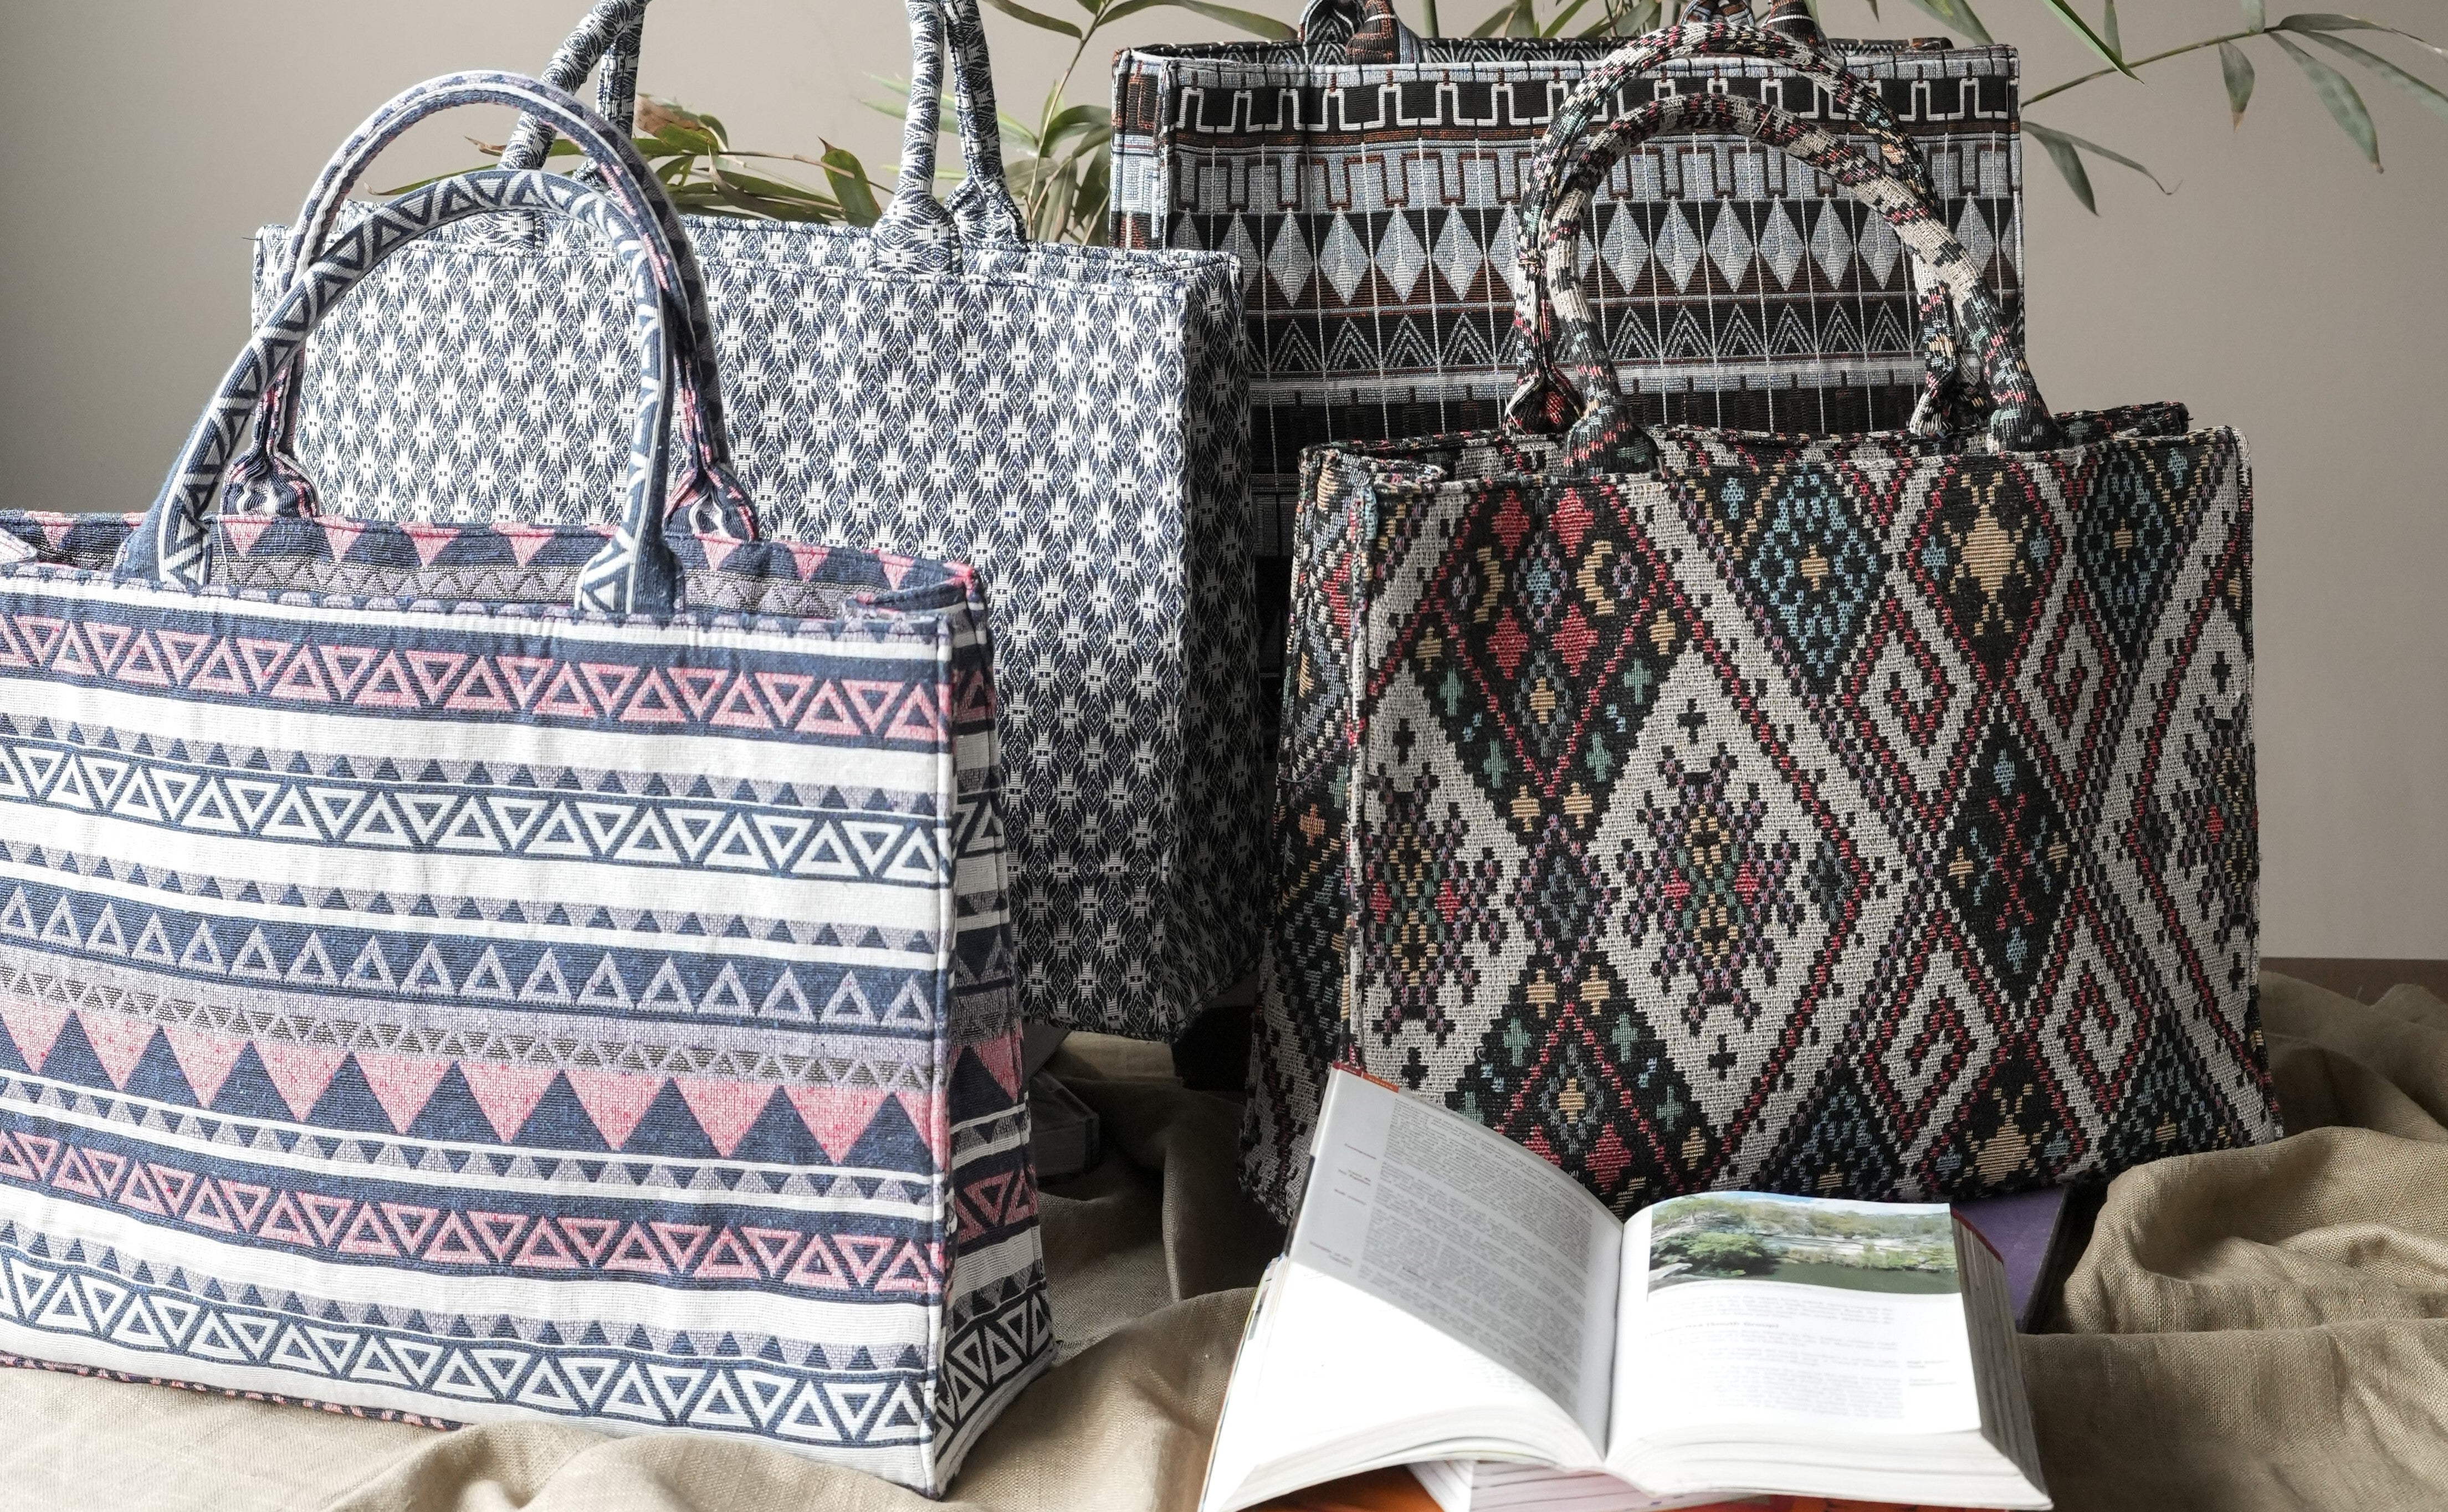 5 Reasons to Add a Book Tote Bag to Your Collection – Kultura Filipino